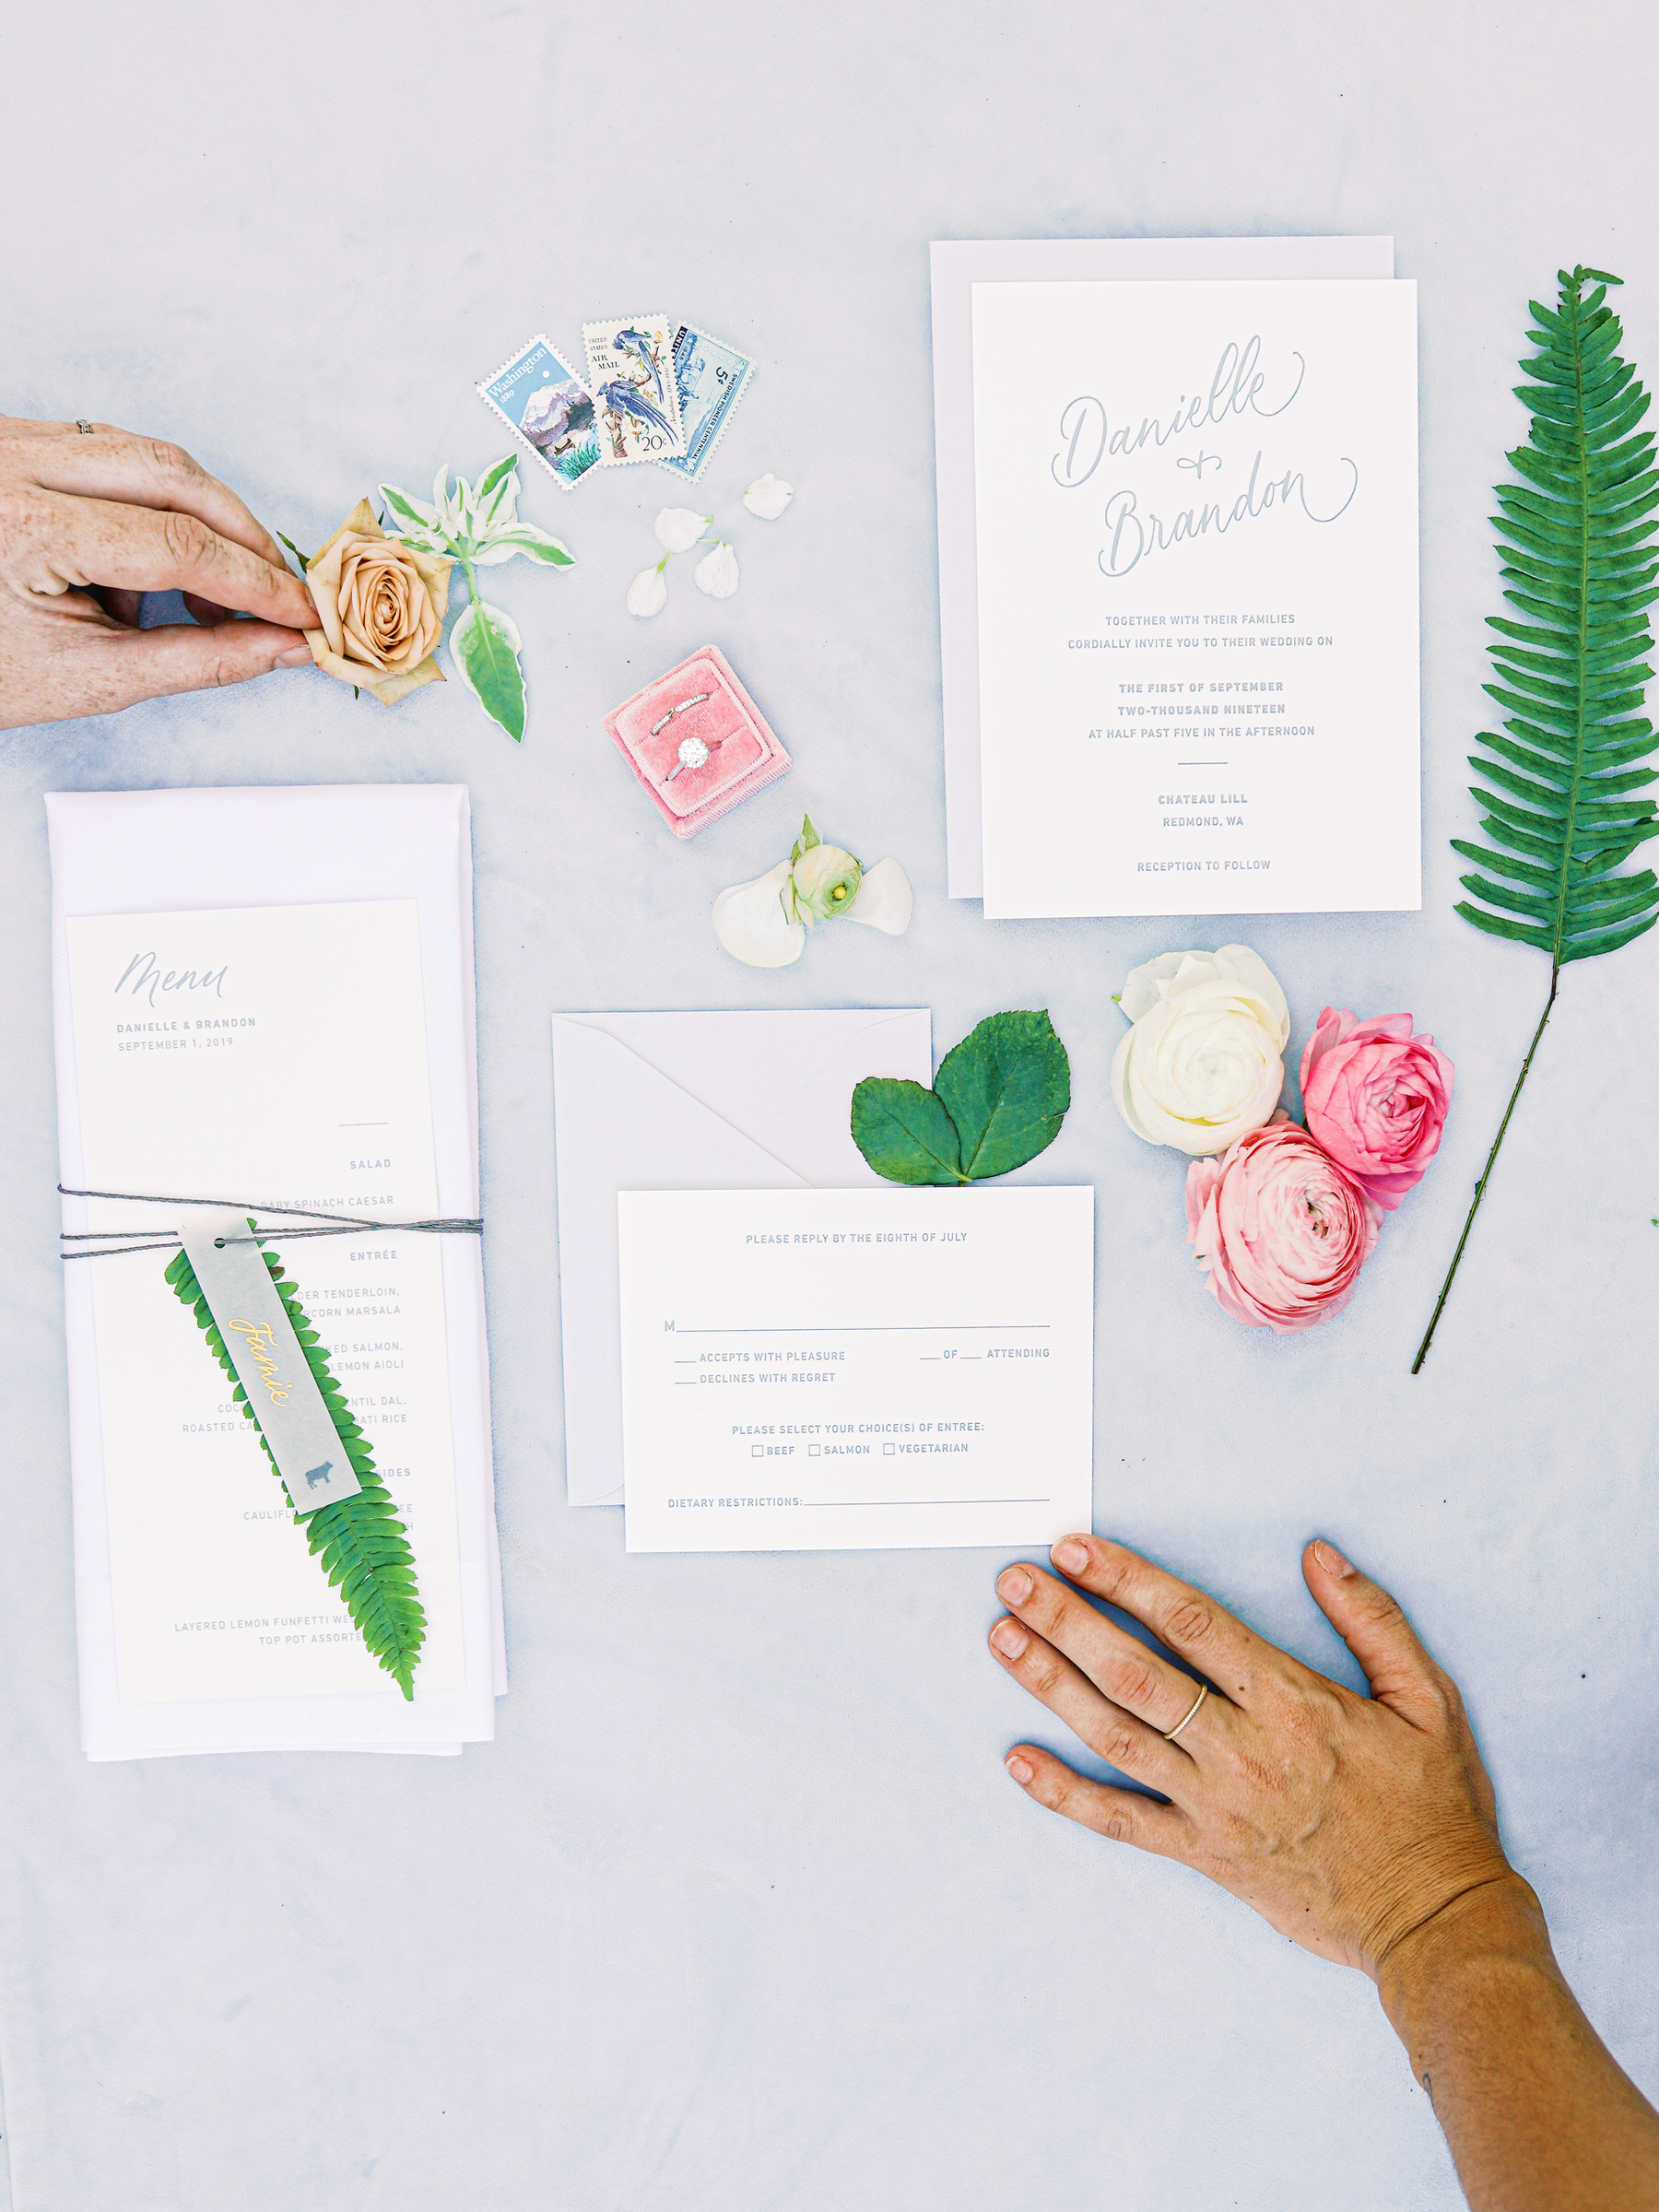 Wedding stationery for Danielle and Brandon's wedding at Chateau Lil